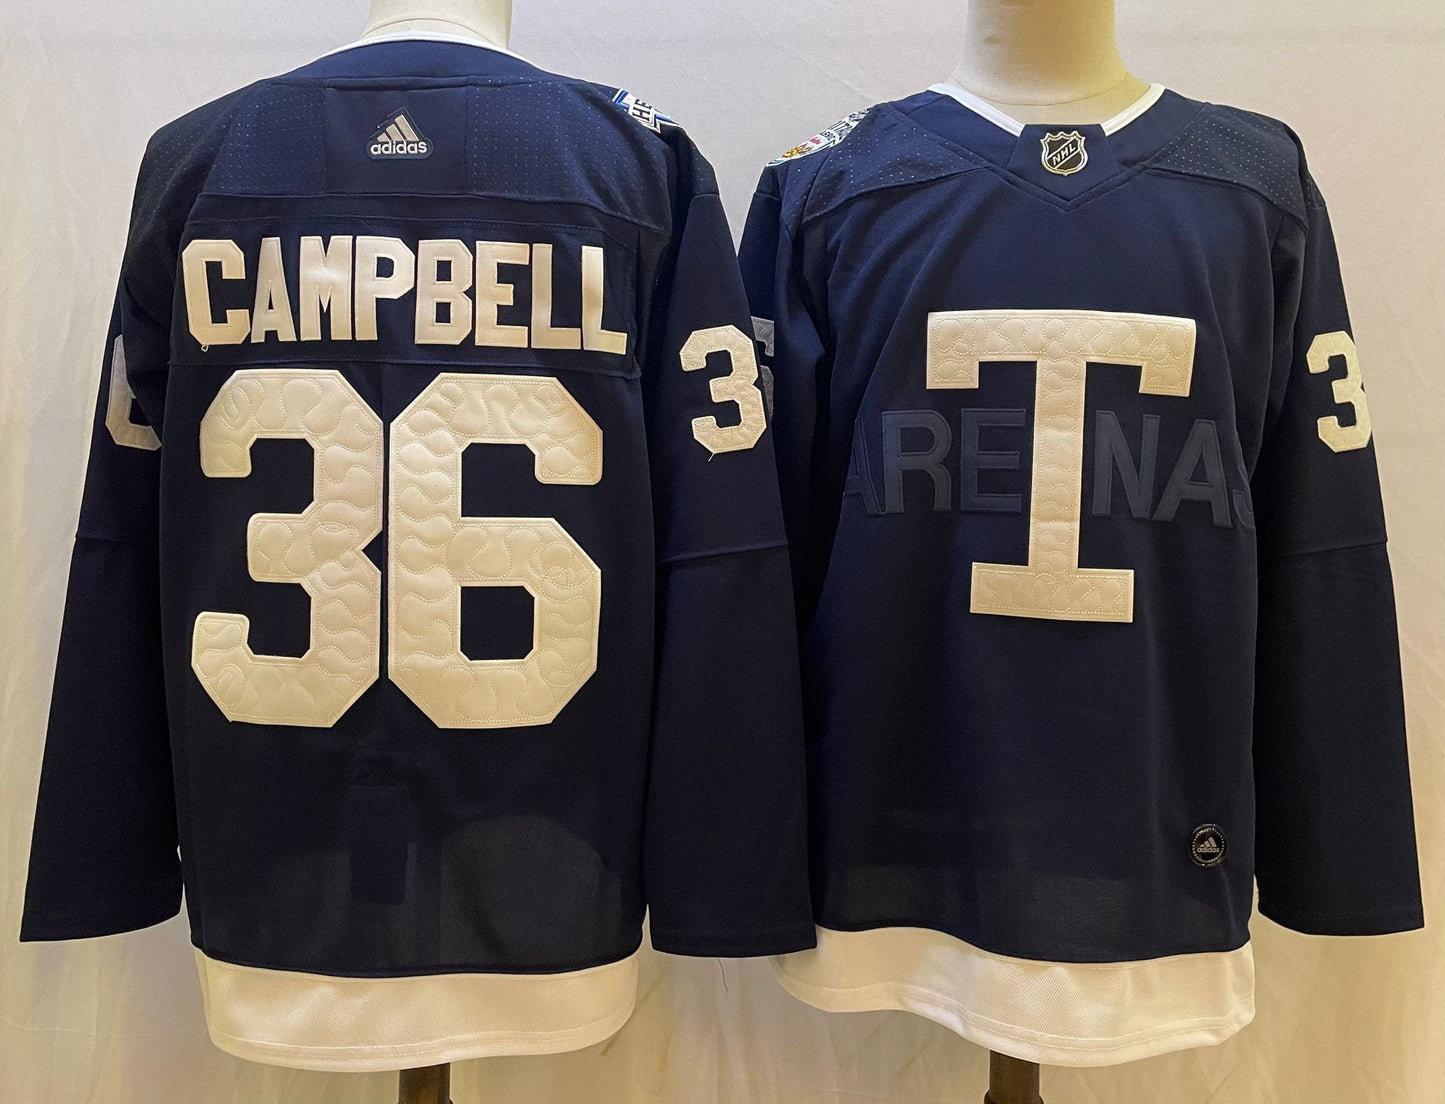 NHL Toronto Maple Leafs CAMPBELL # 36 Jersey